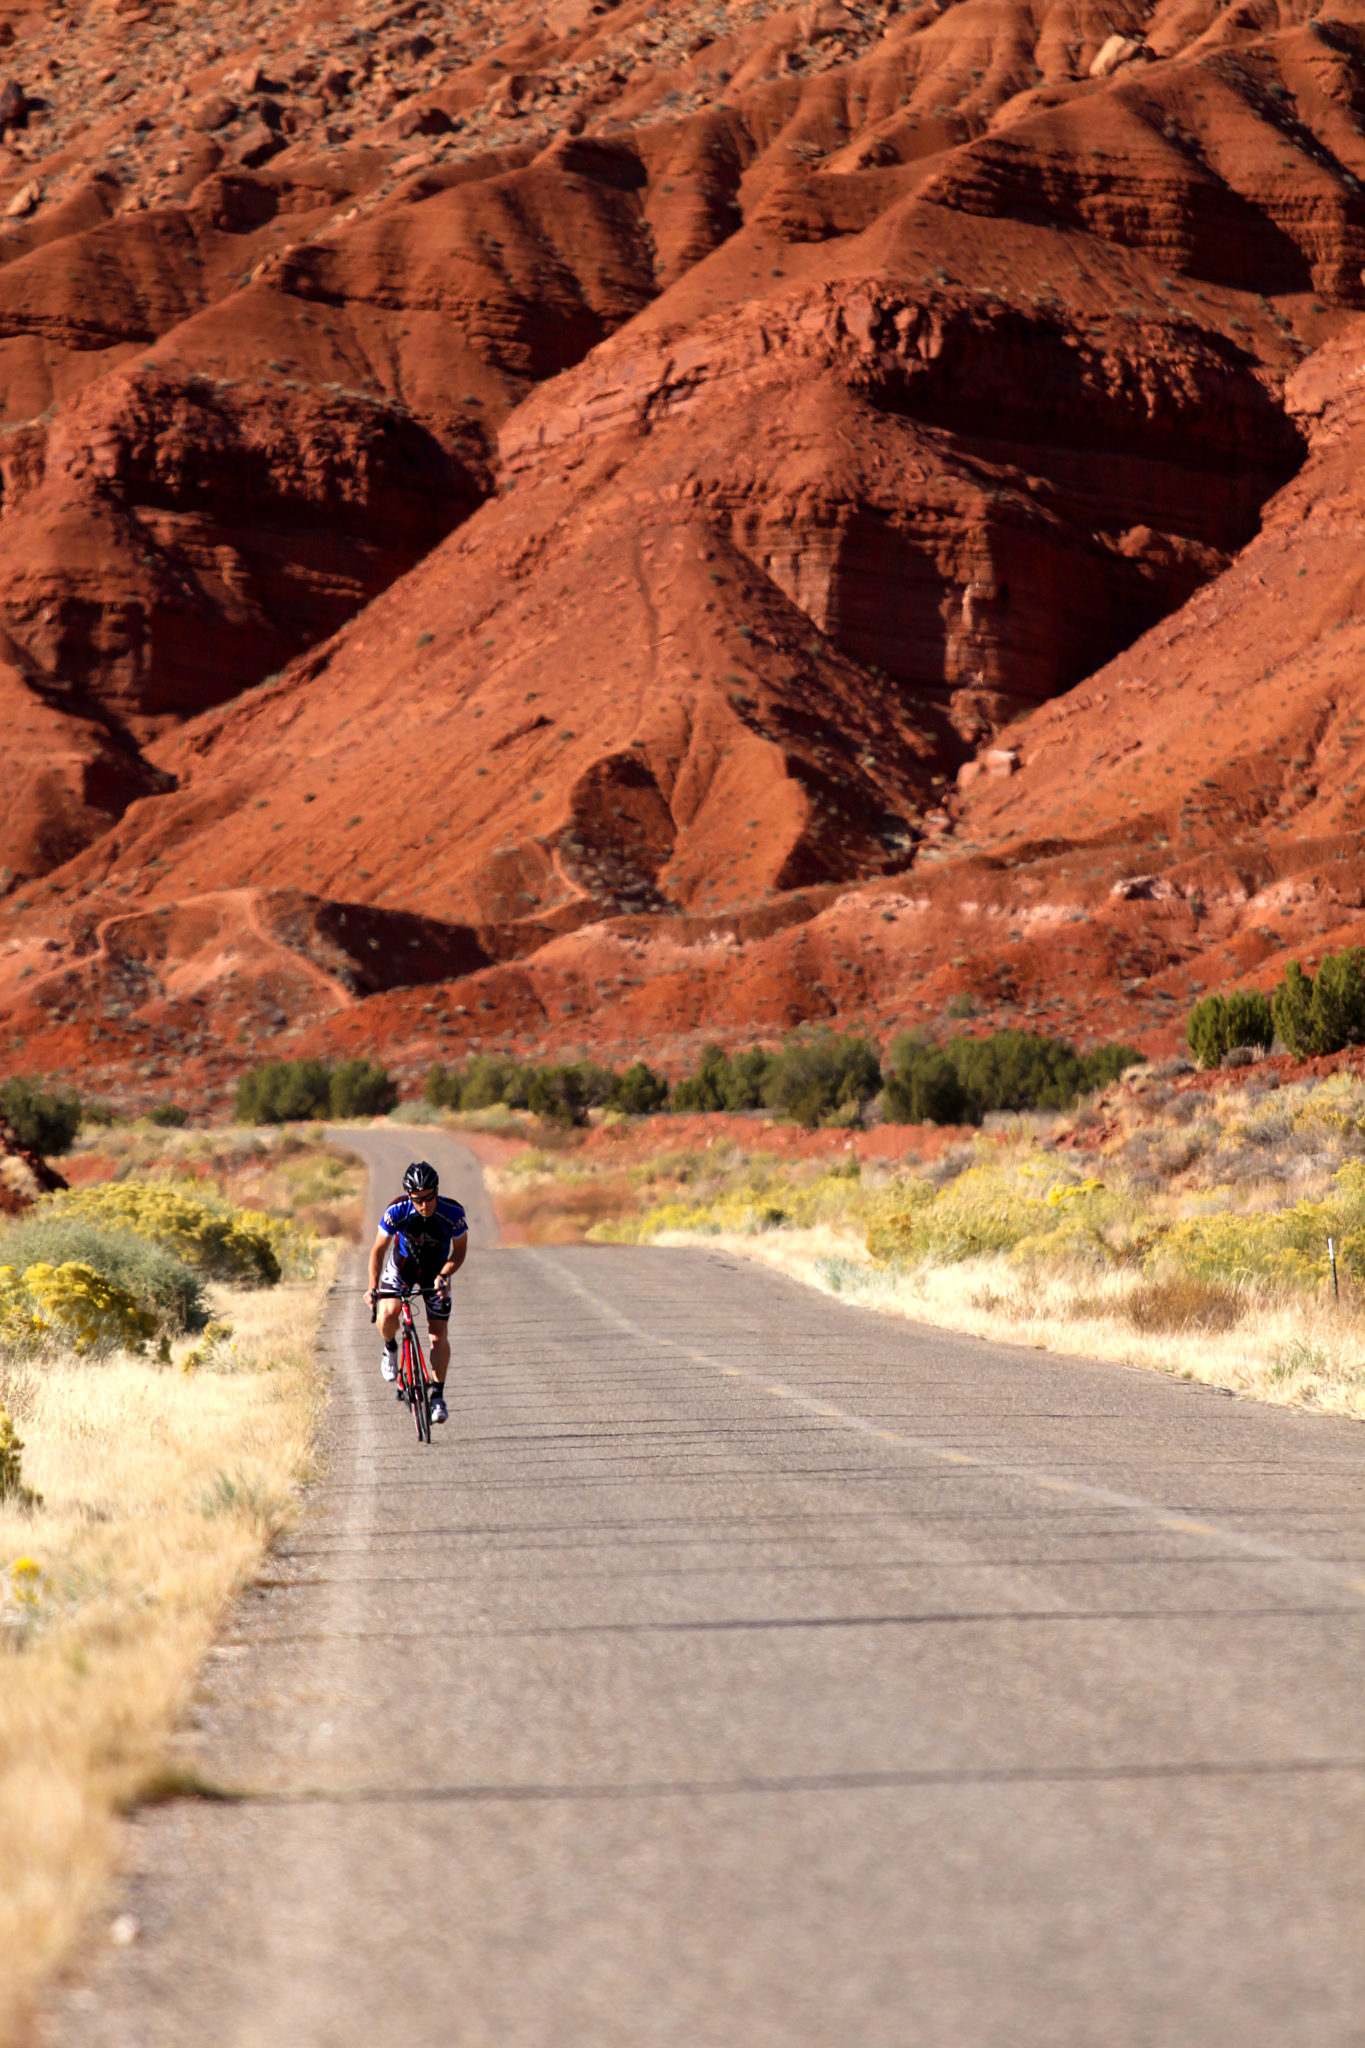 A person riding a bike on a paved road toward the camera with red rock hillsides looming in the background